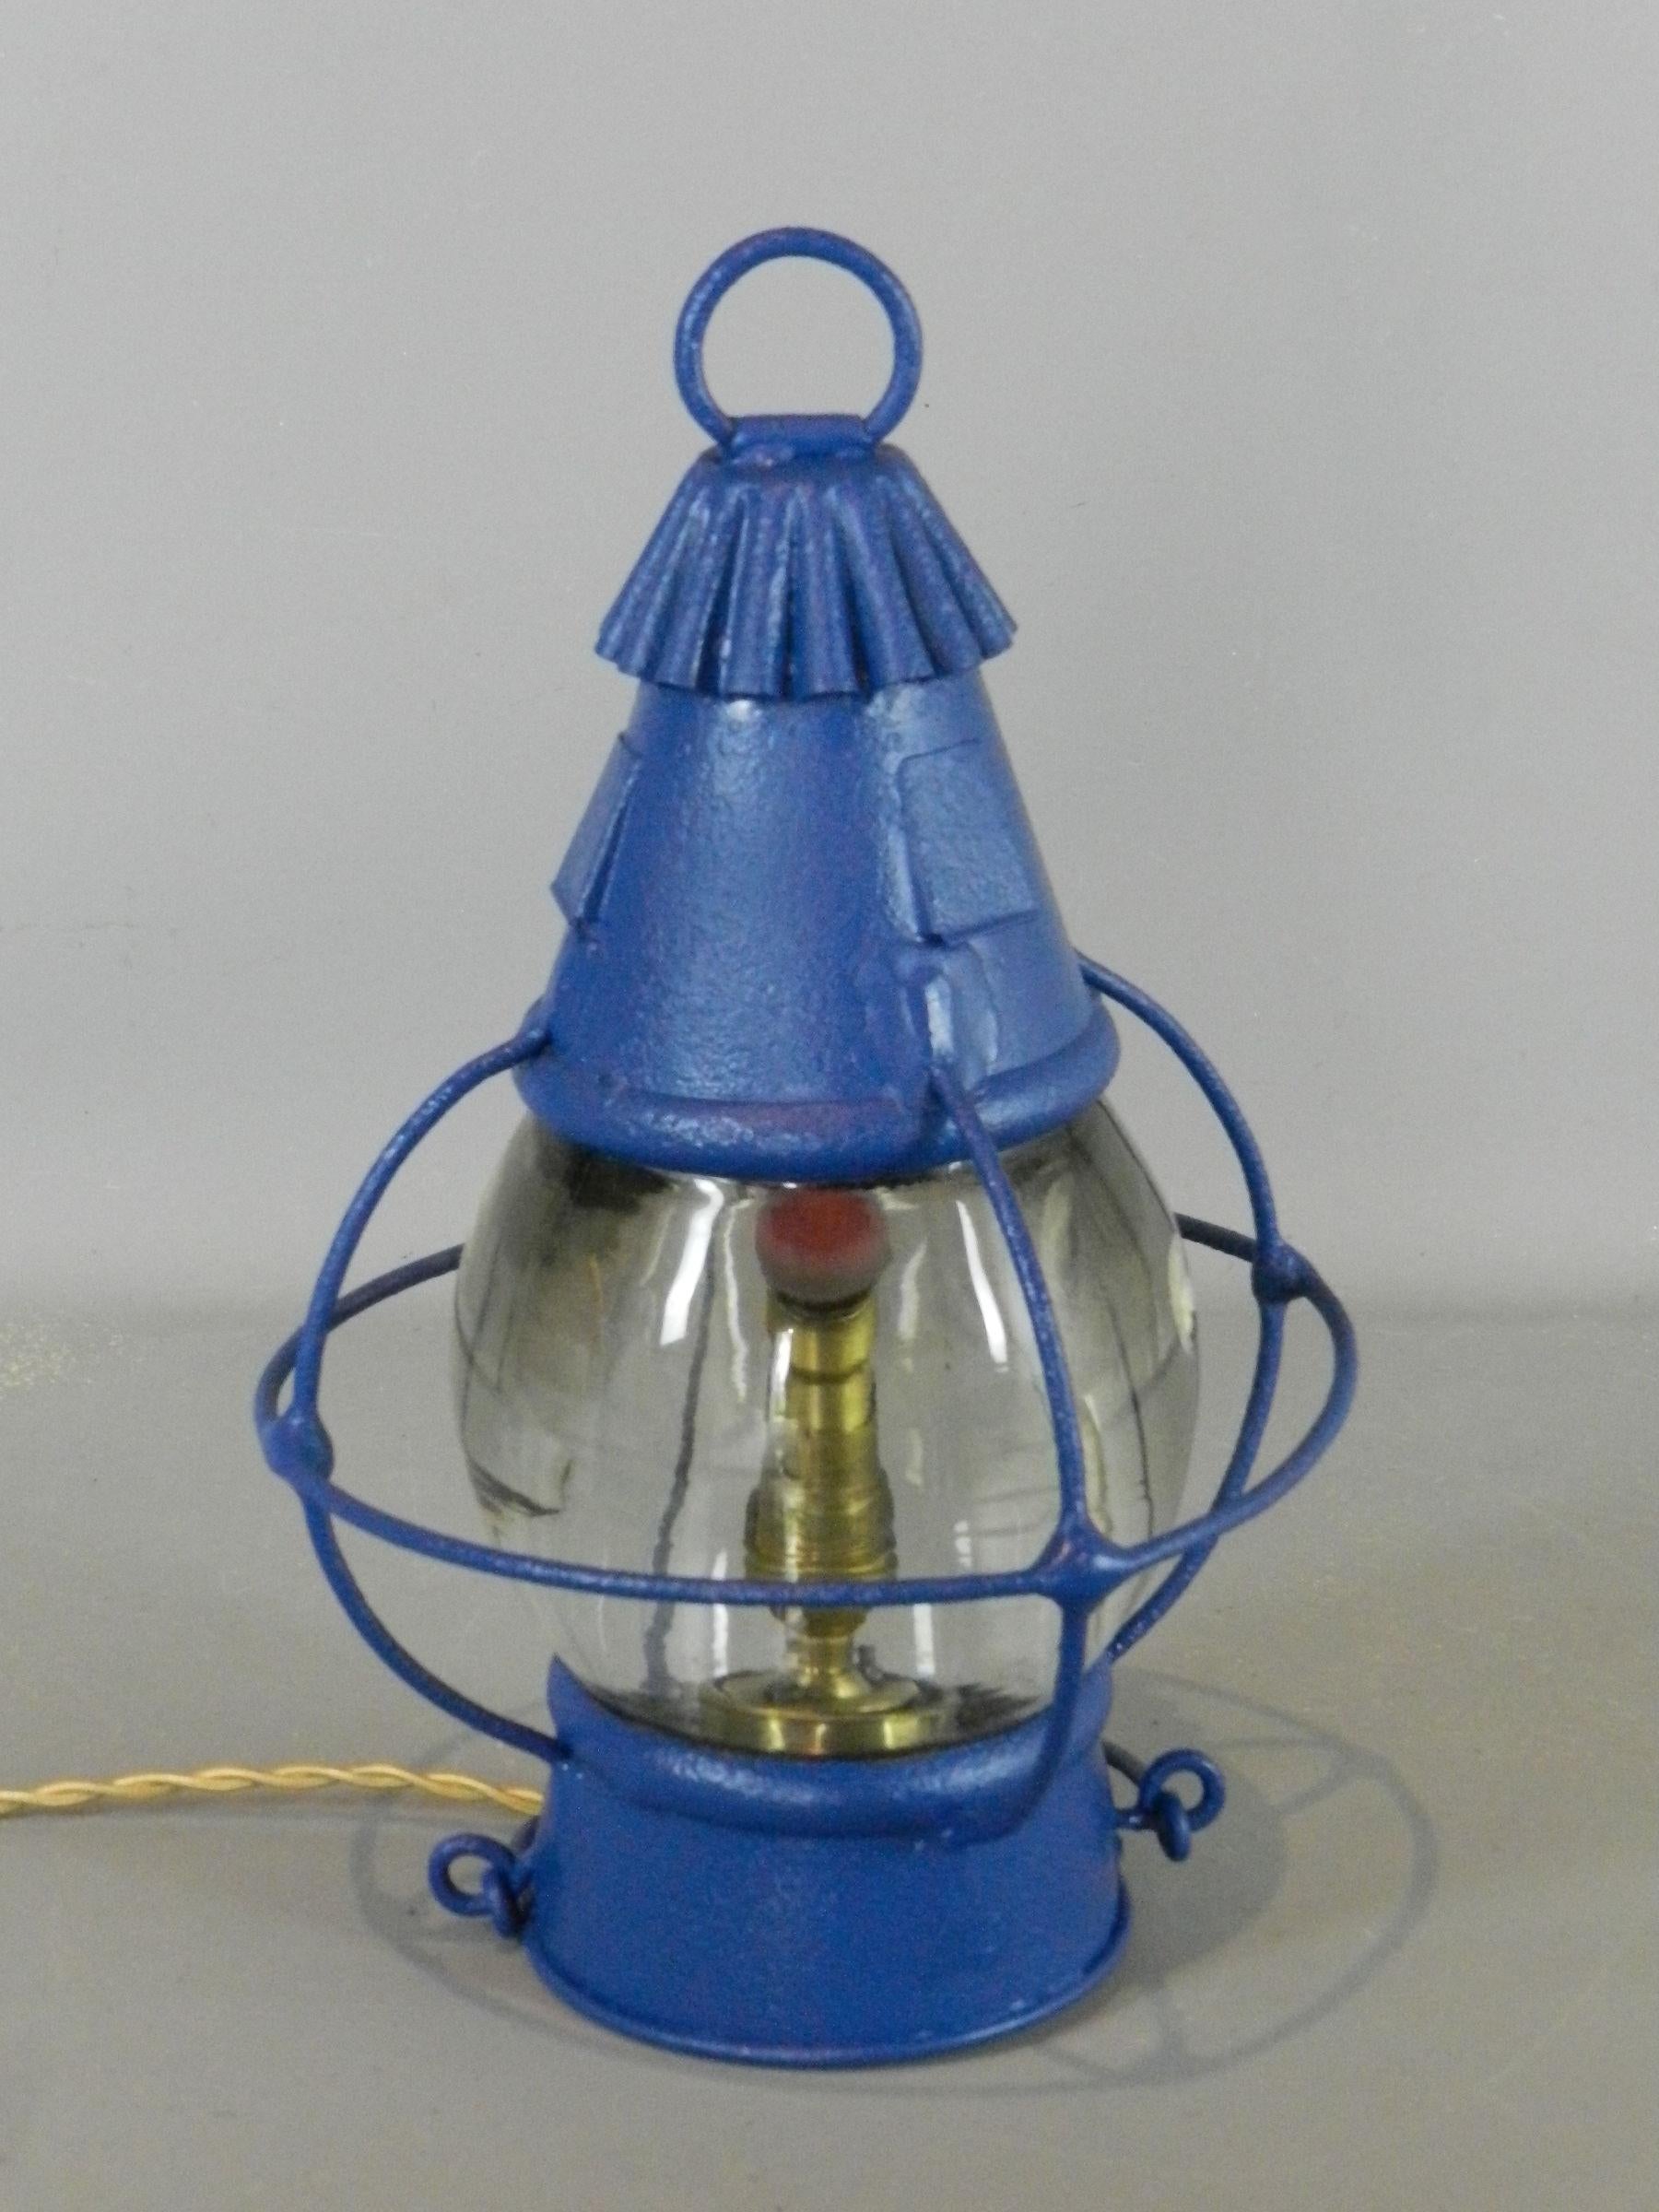 An original ship's oil lantern that has been converted to electricity, which can be used either as a table lamp or hanging lamp.

The glass has bubbles and inclusions consistent with its age.

The lantern has been re-painted and re-wired with